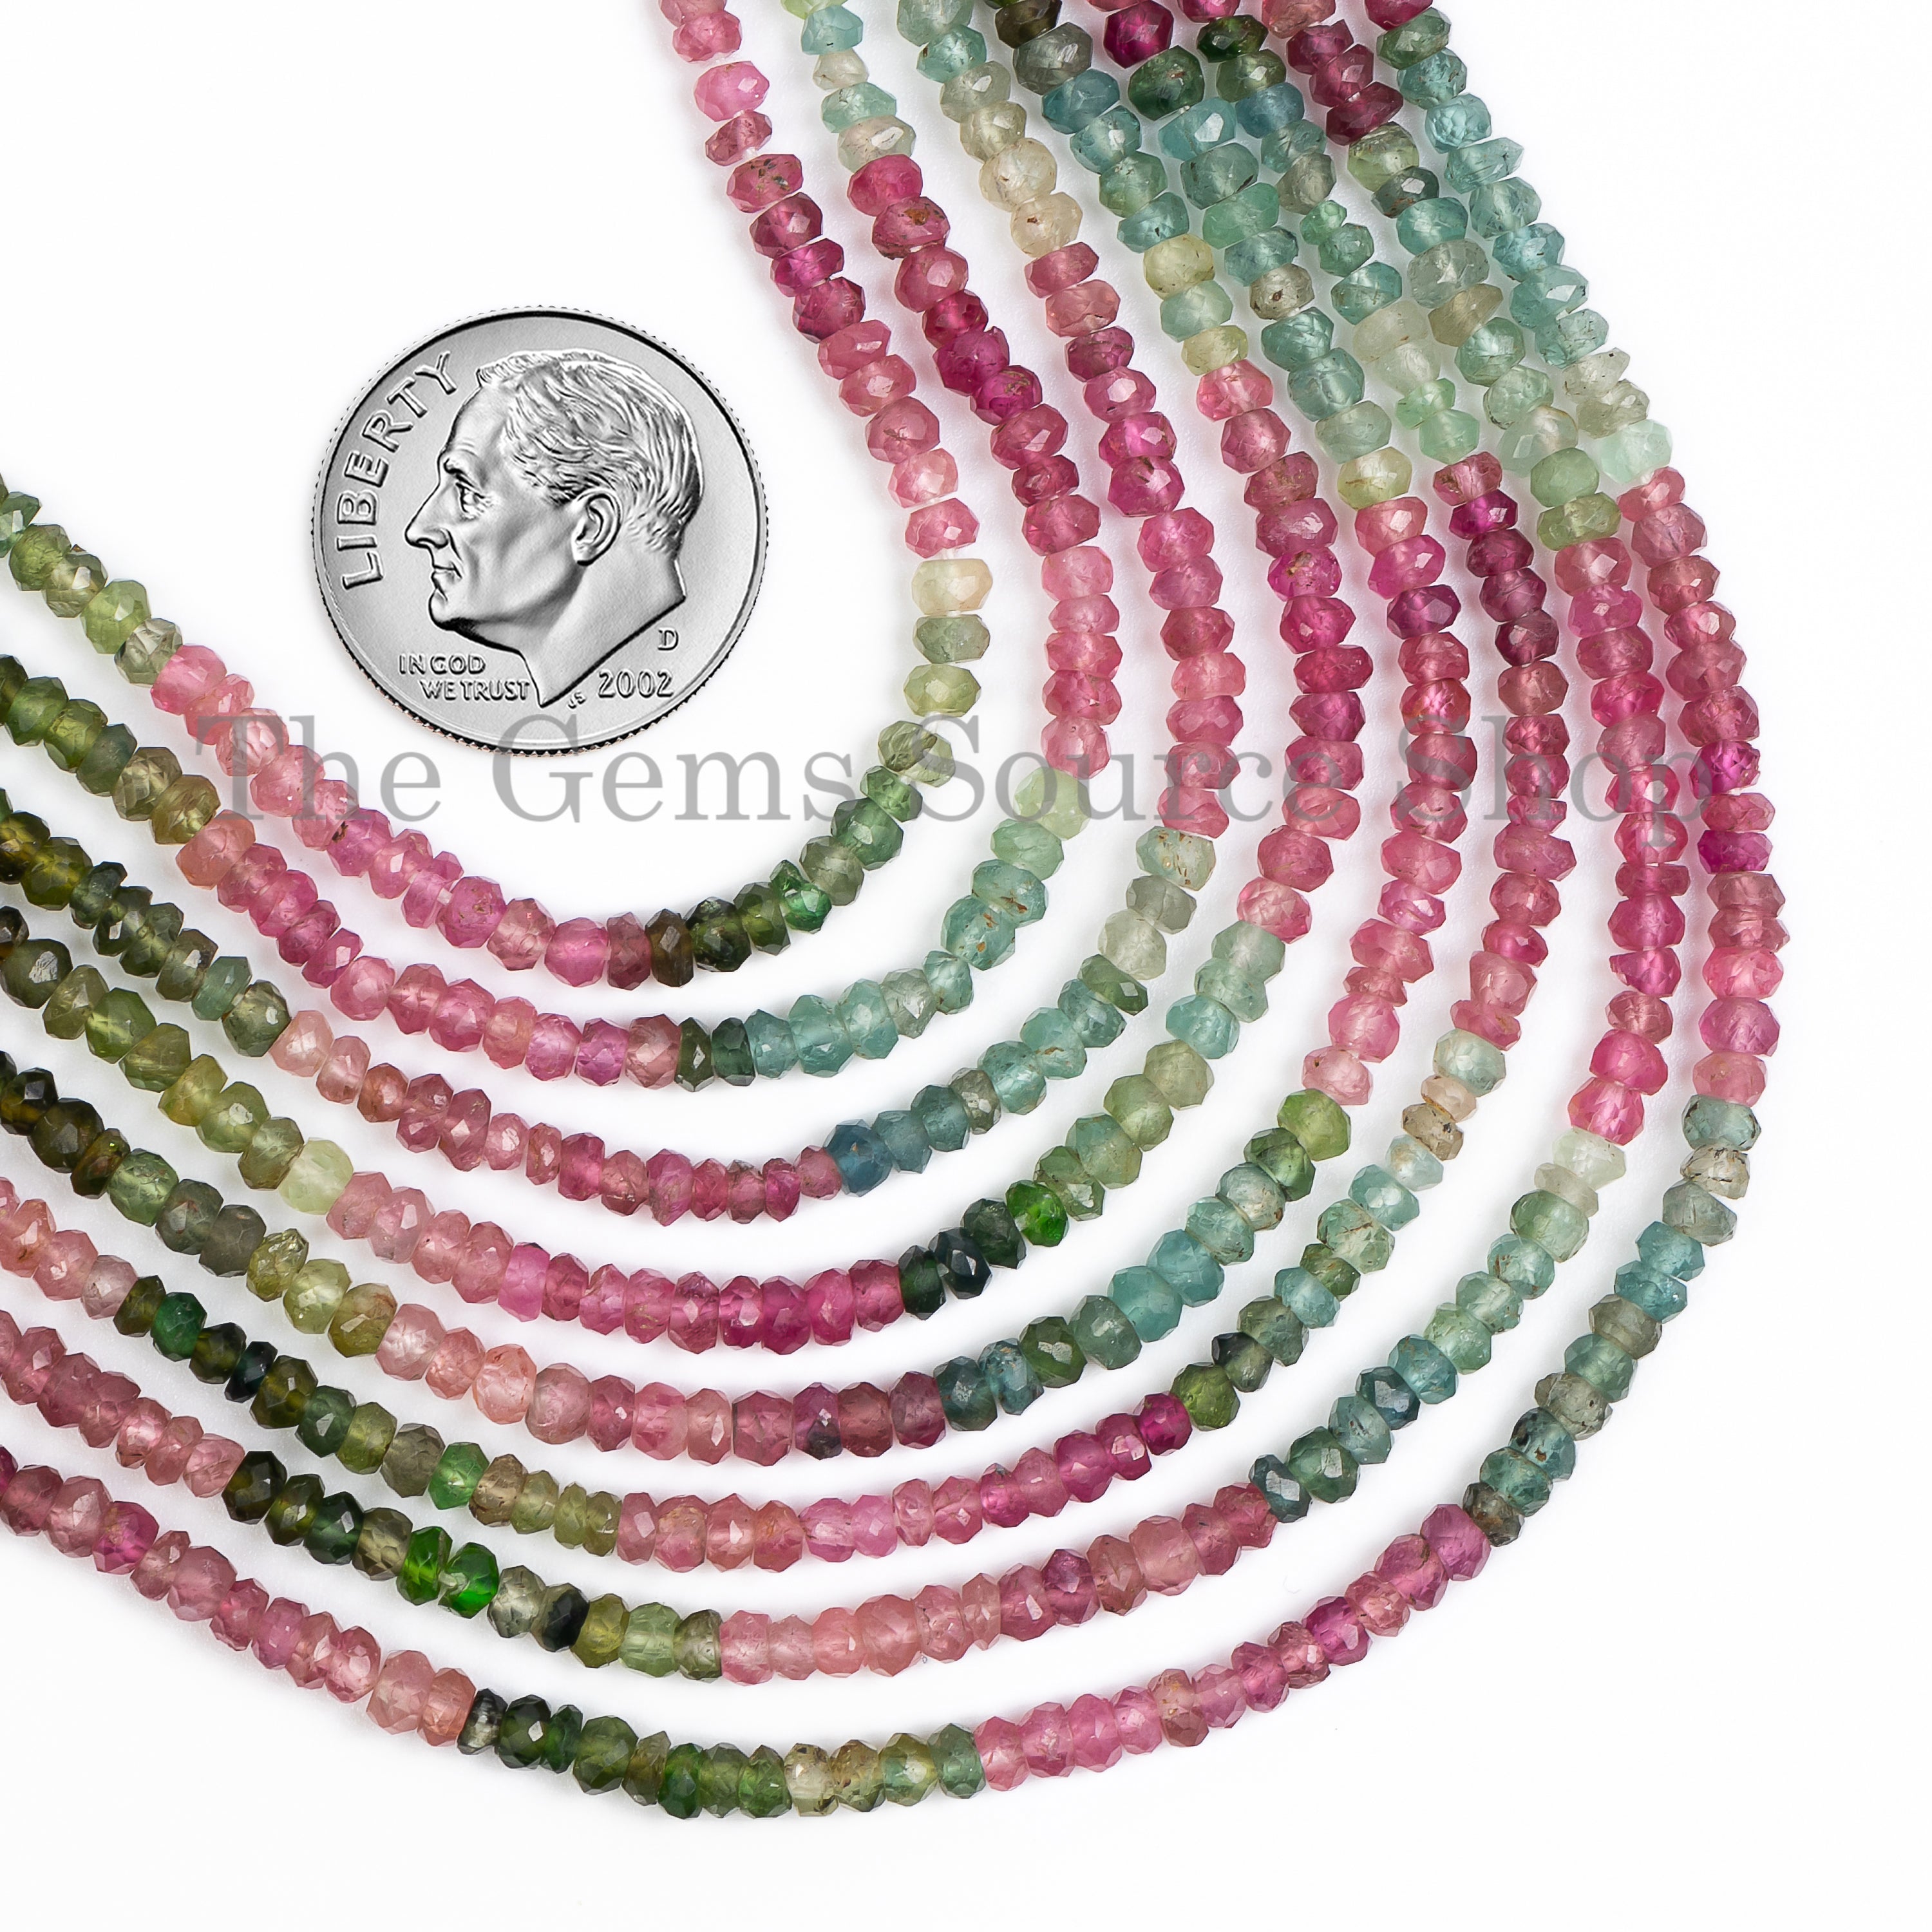 Multi Tourmaline Faceted Rondelle Beads, Loose Natural Tourmaline Beads, TGS-5039